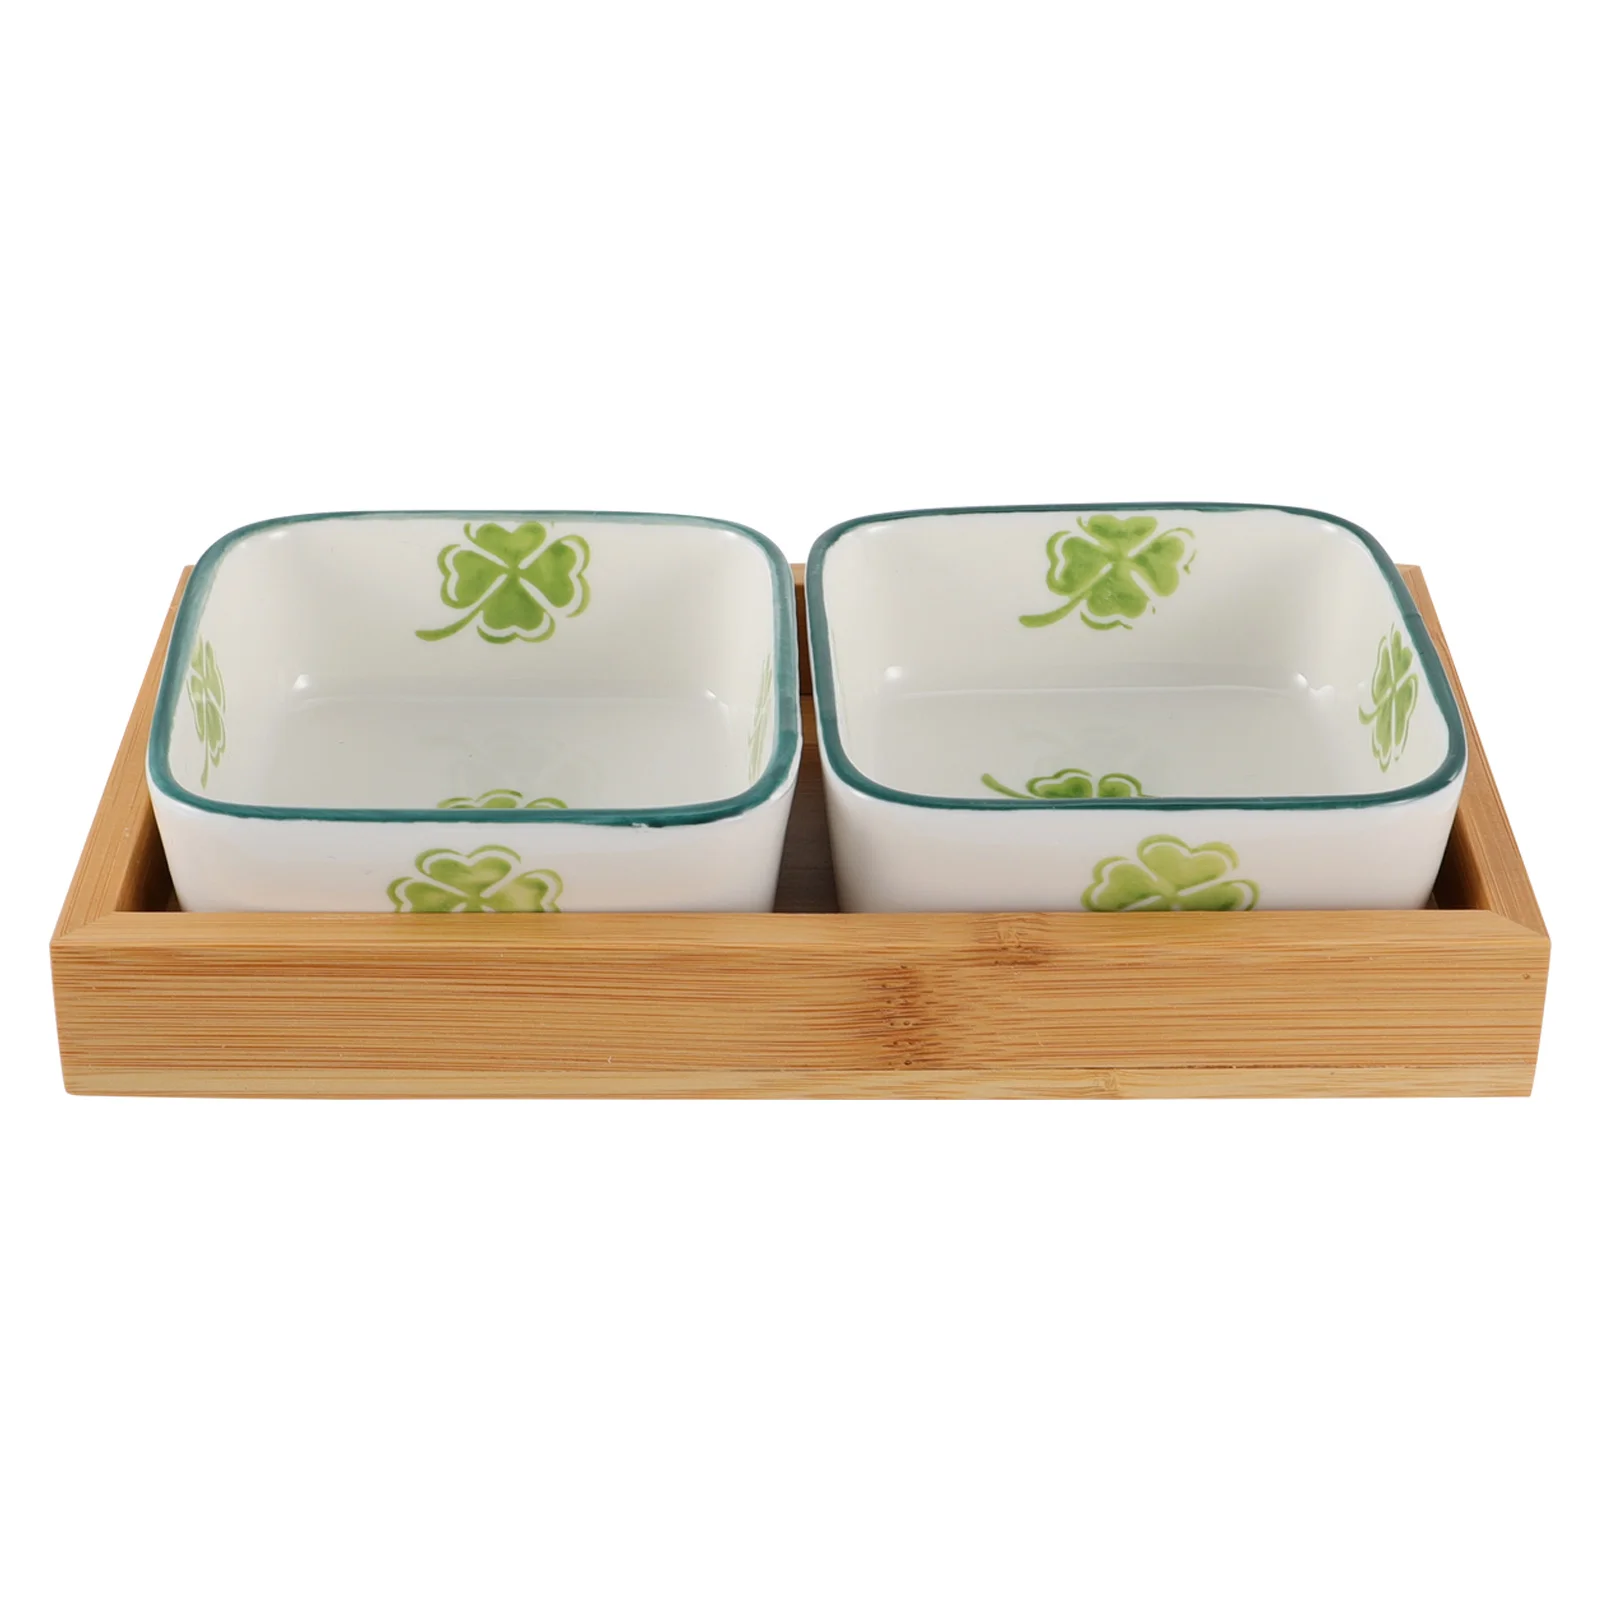 

Japanese Fruit Plate Jewelry Tray Trays Snack Serving Nuts Plates Multipurpose Ceramic with Wood Holder Plats